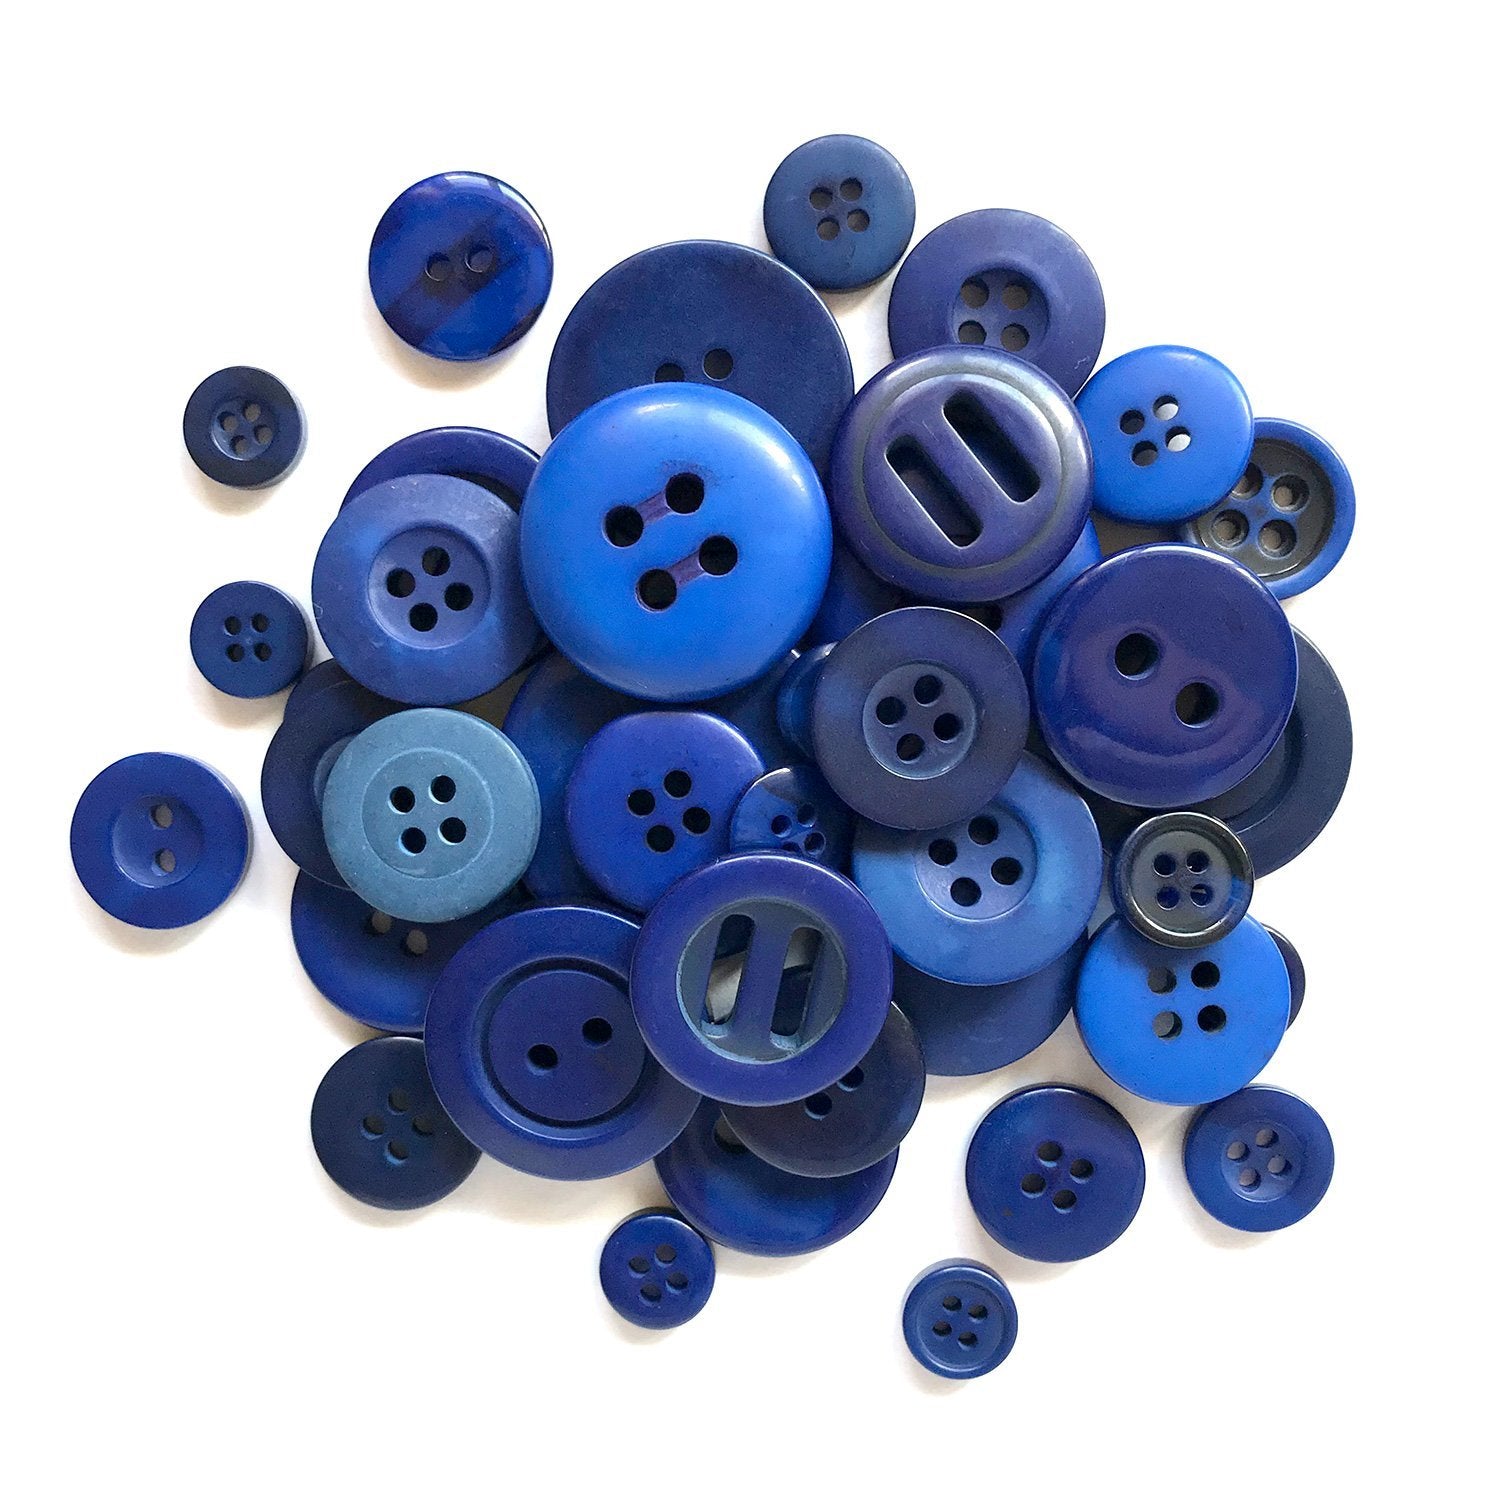 Red, white & blue Buttons for Crafts Sewing Scrapbooks and Quilts